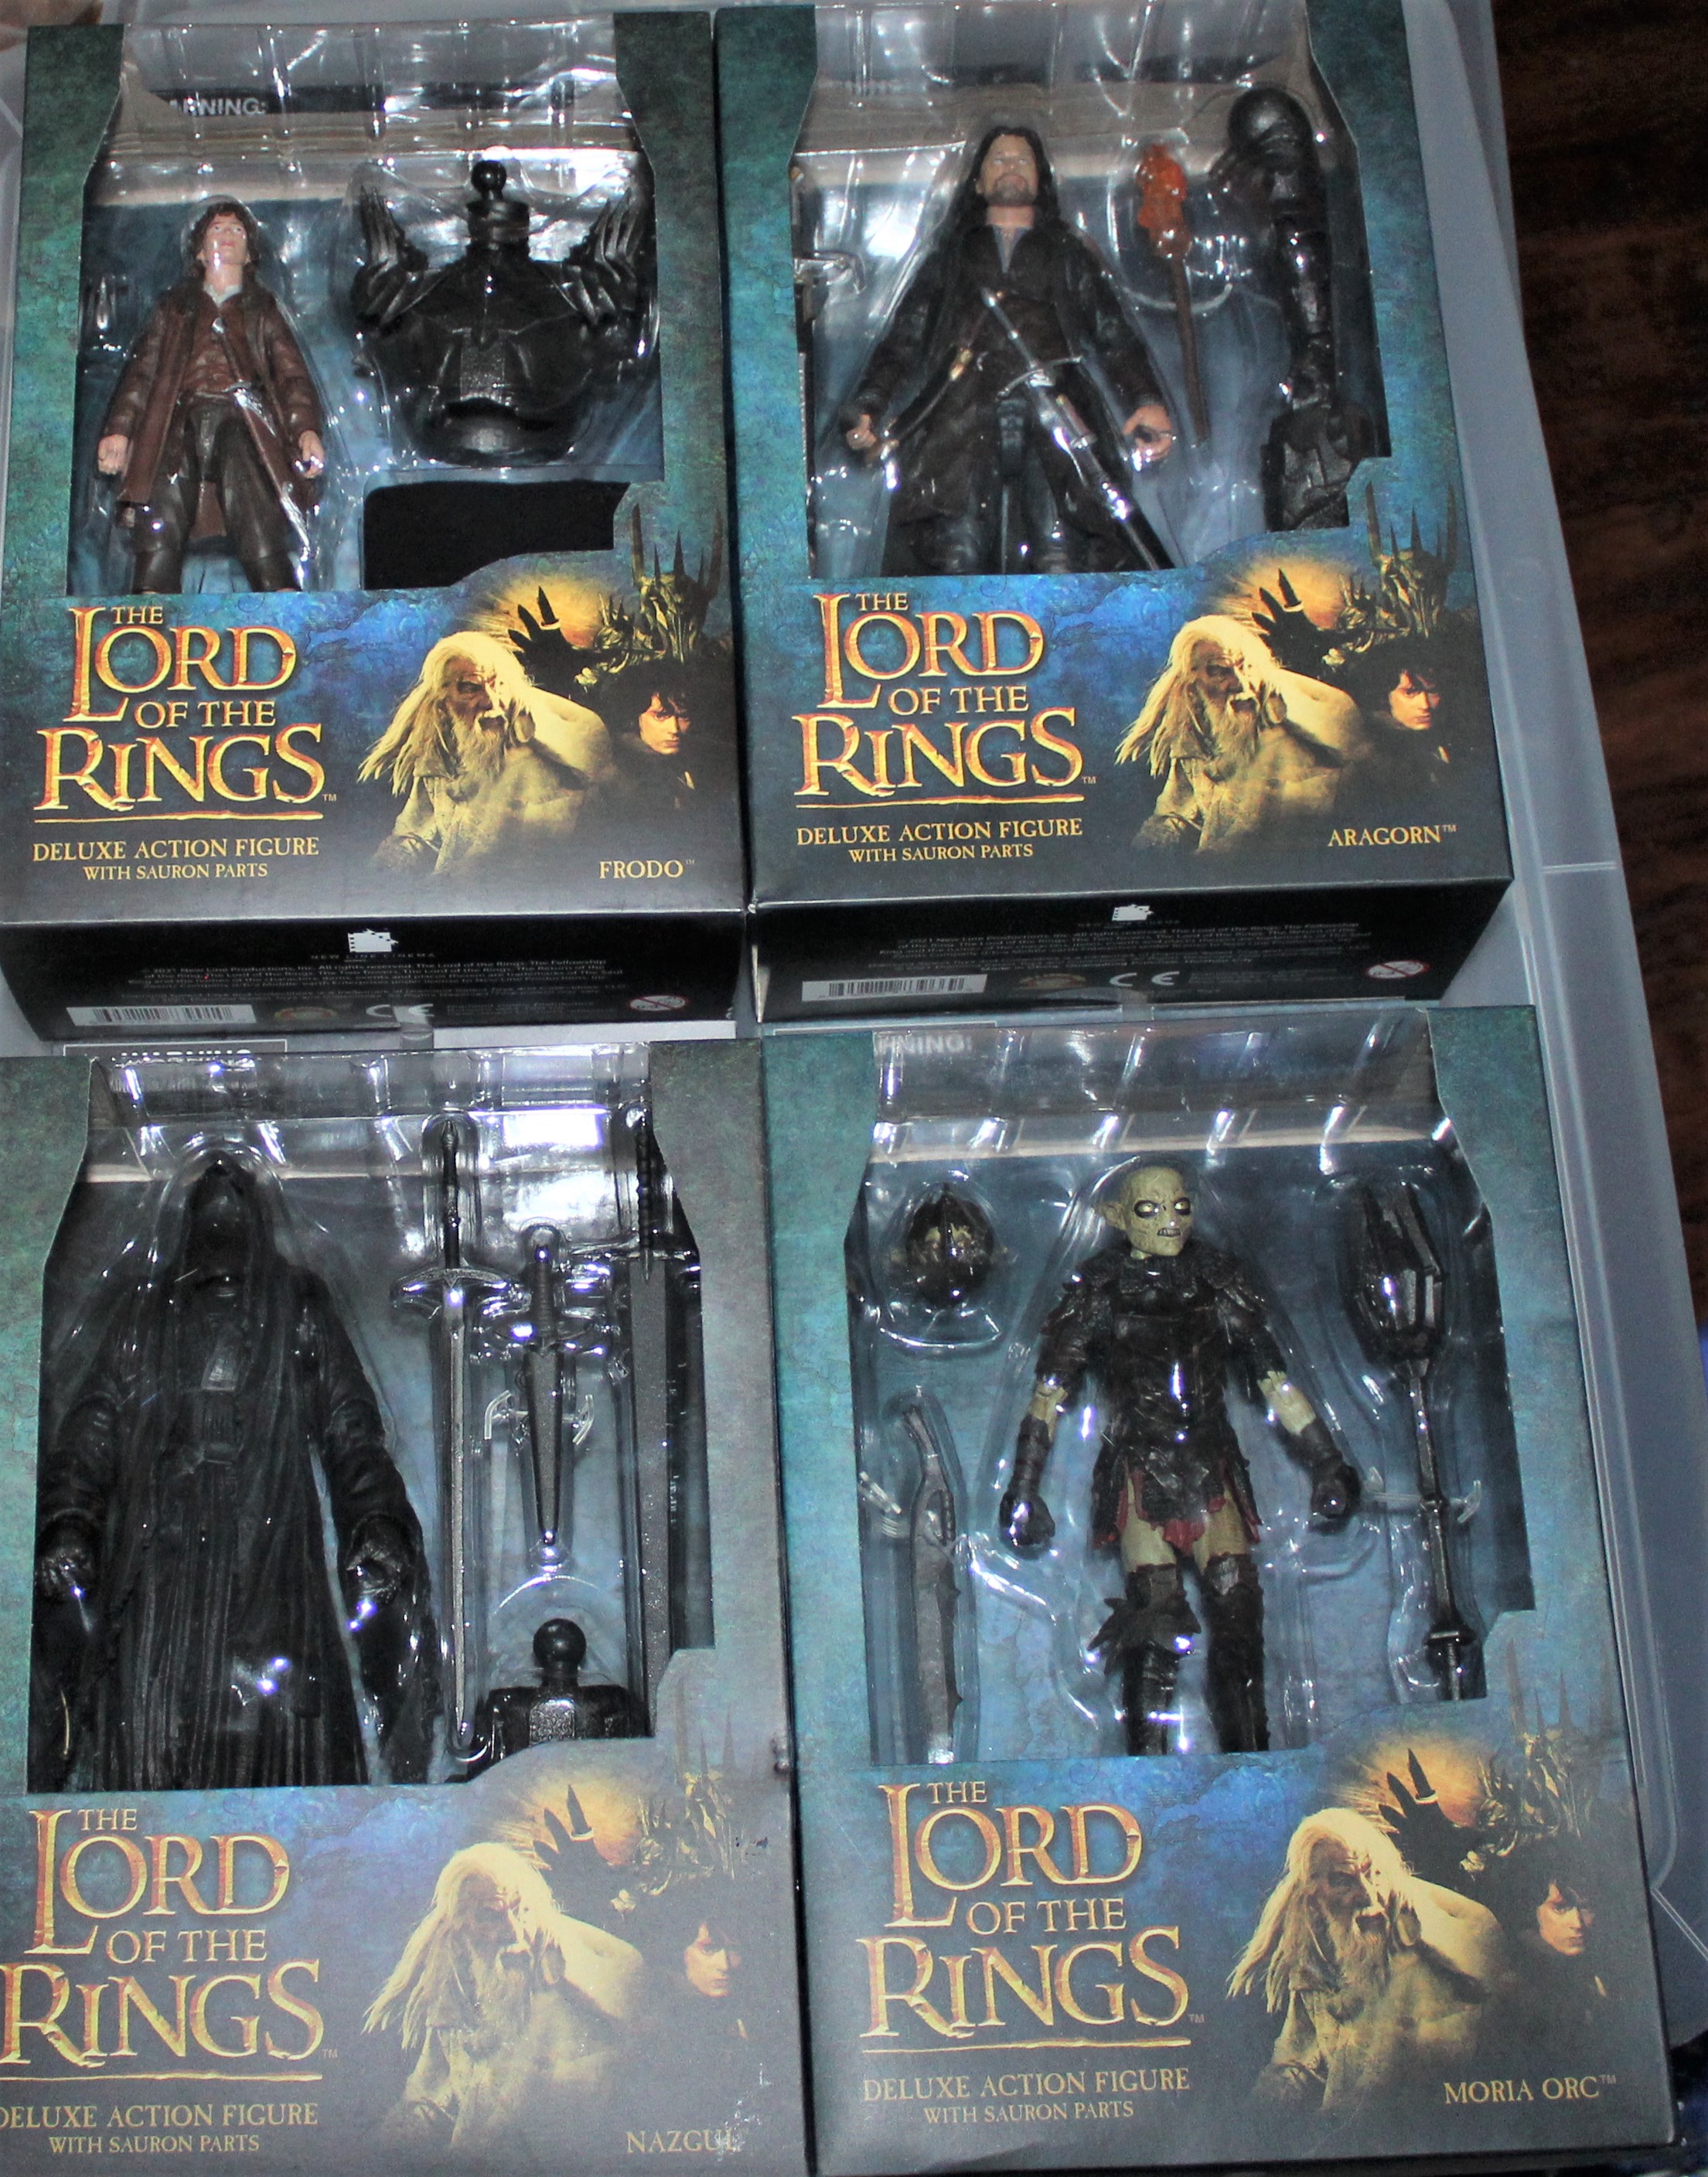 The Lord of the Rings (Series 6) Deluxe Action Figure Set